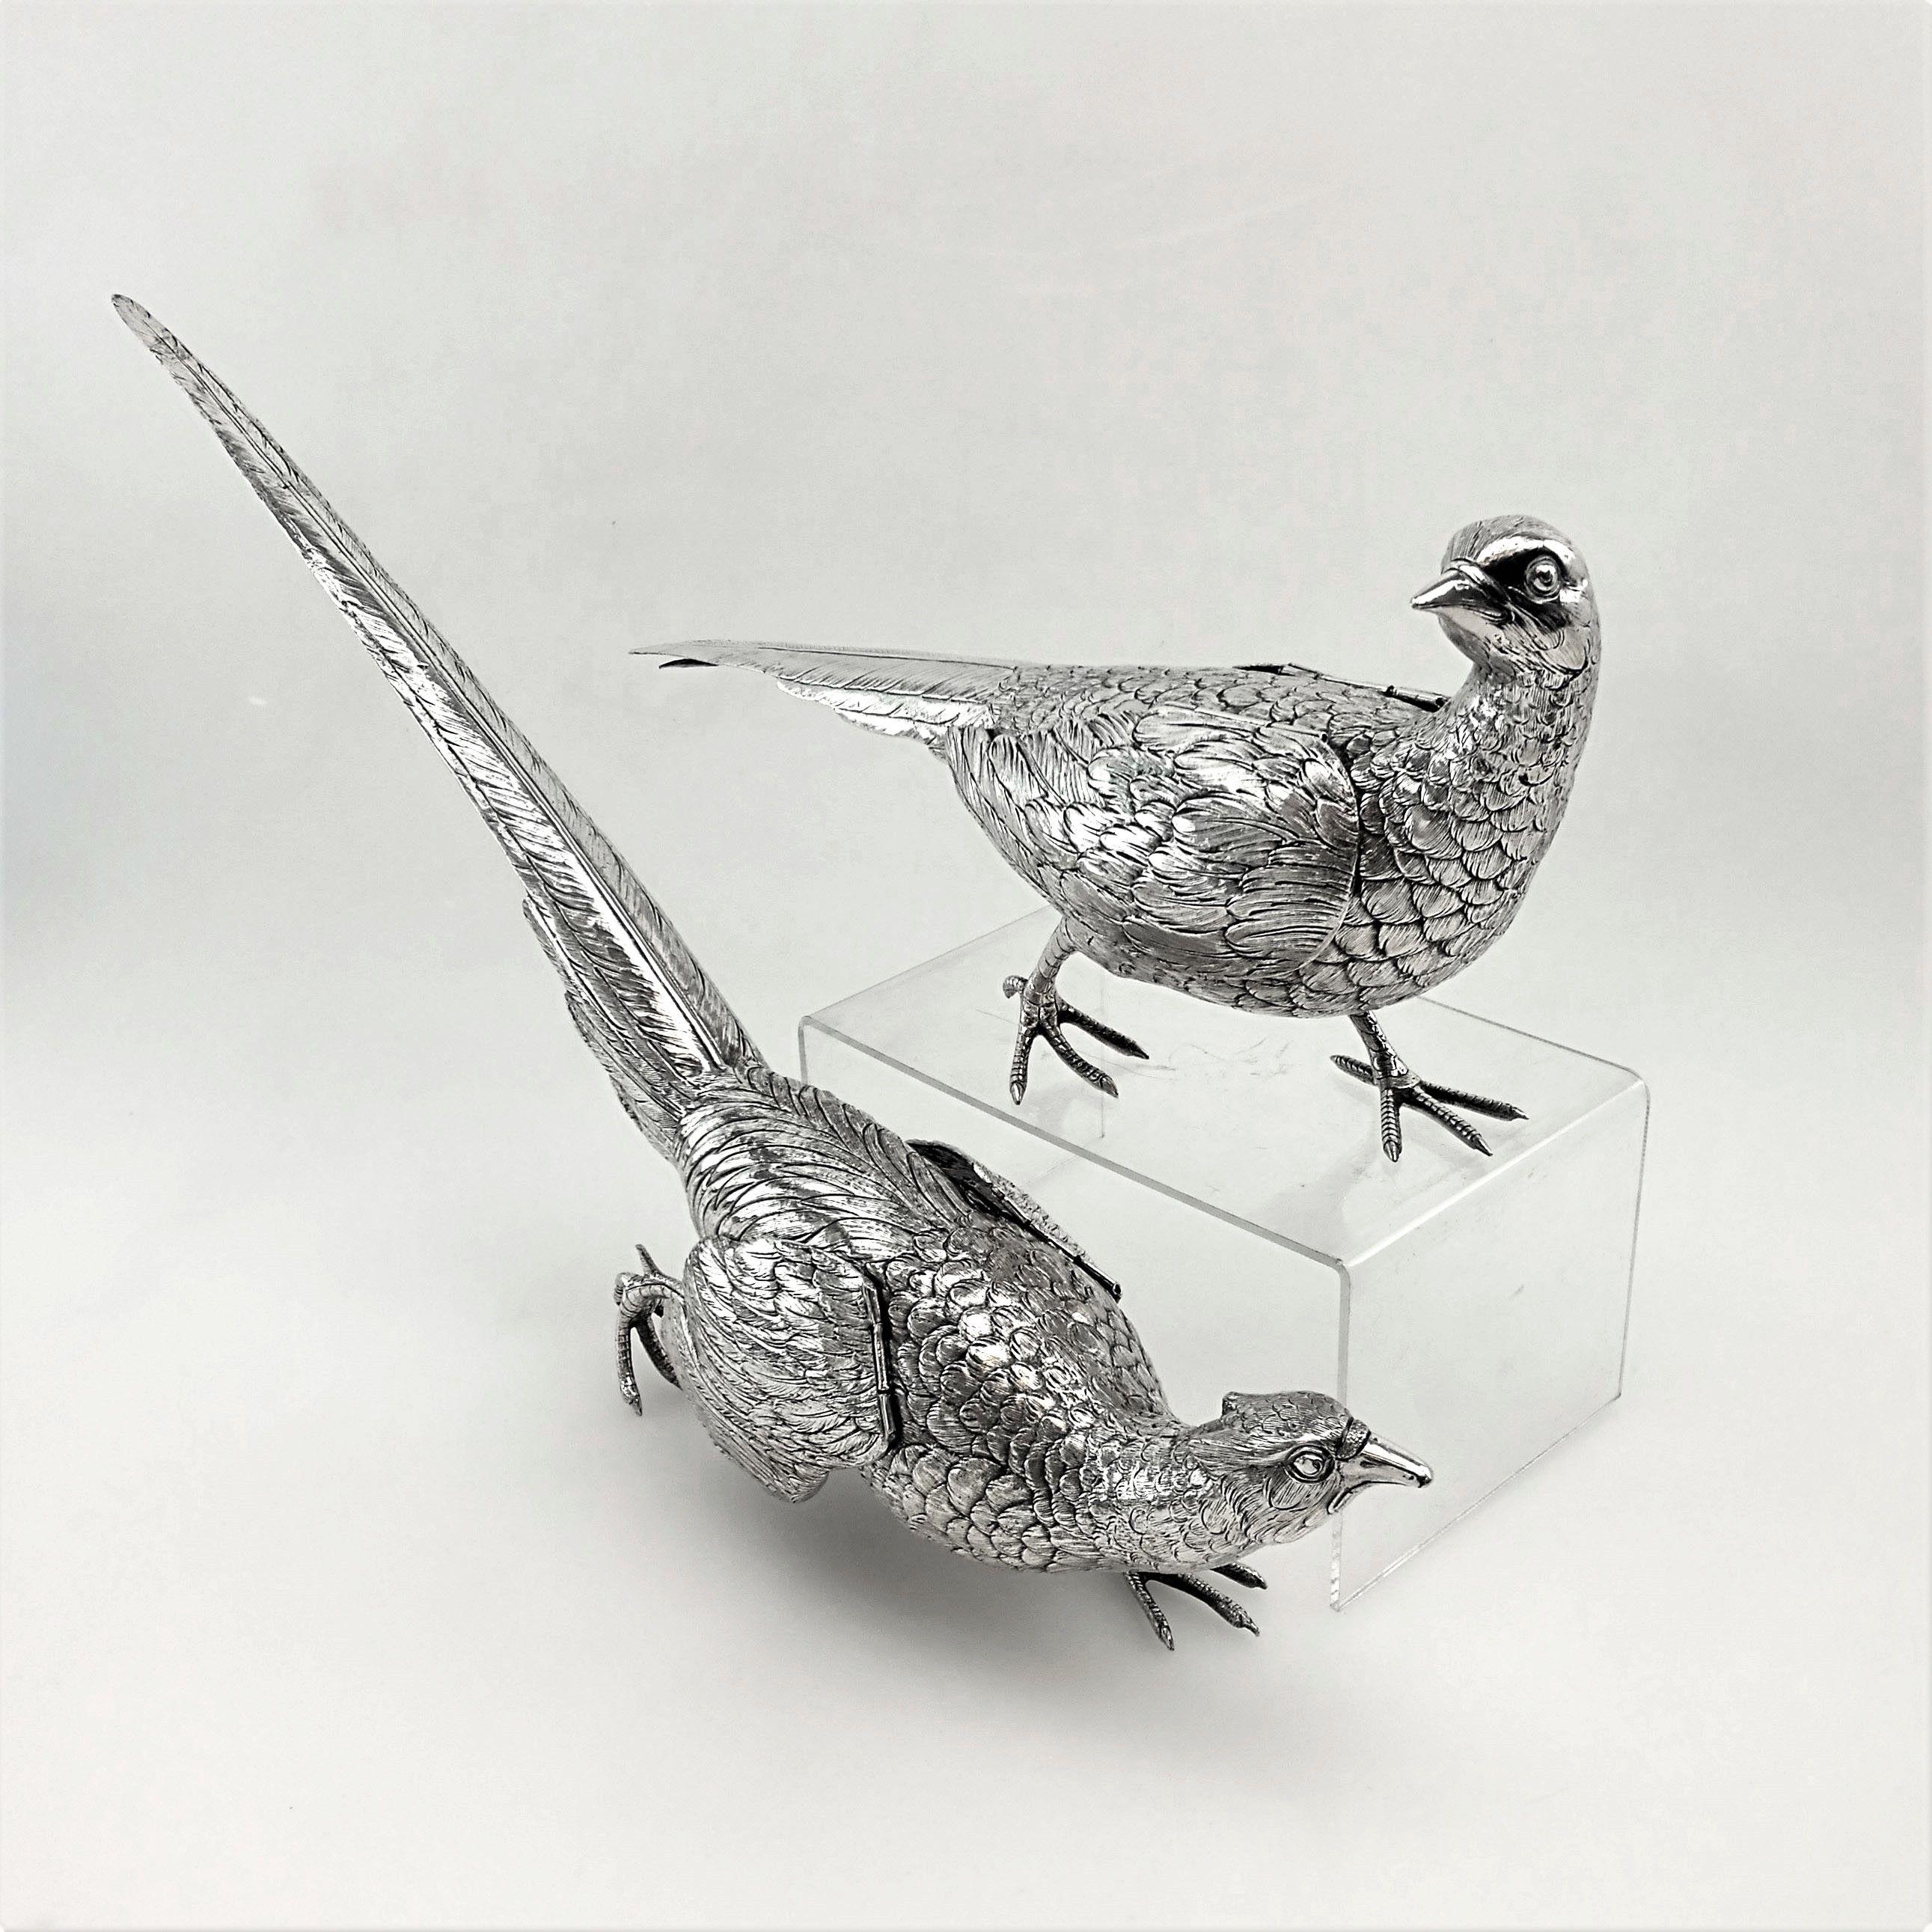 A magnificent pair of antique German solid Silver Pheasants created with a wonderful attention to detail. These Pheasants are of substantially large size and heavy weight and are excellent quality examples of these classic decorative items. These